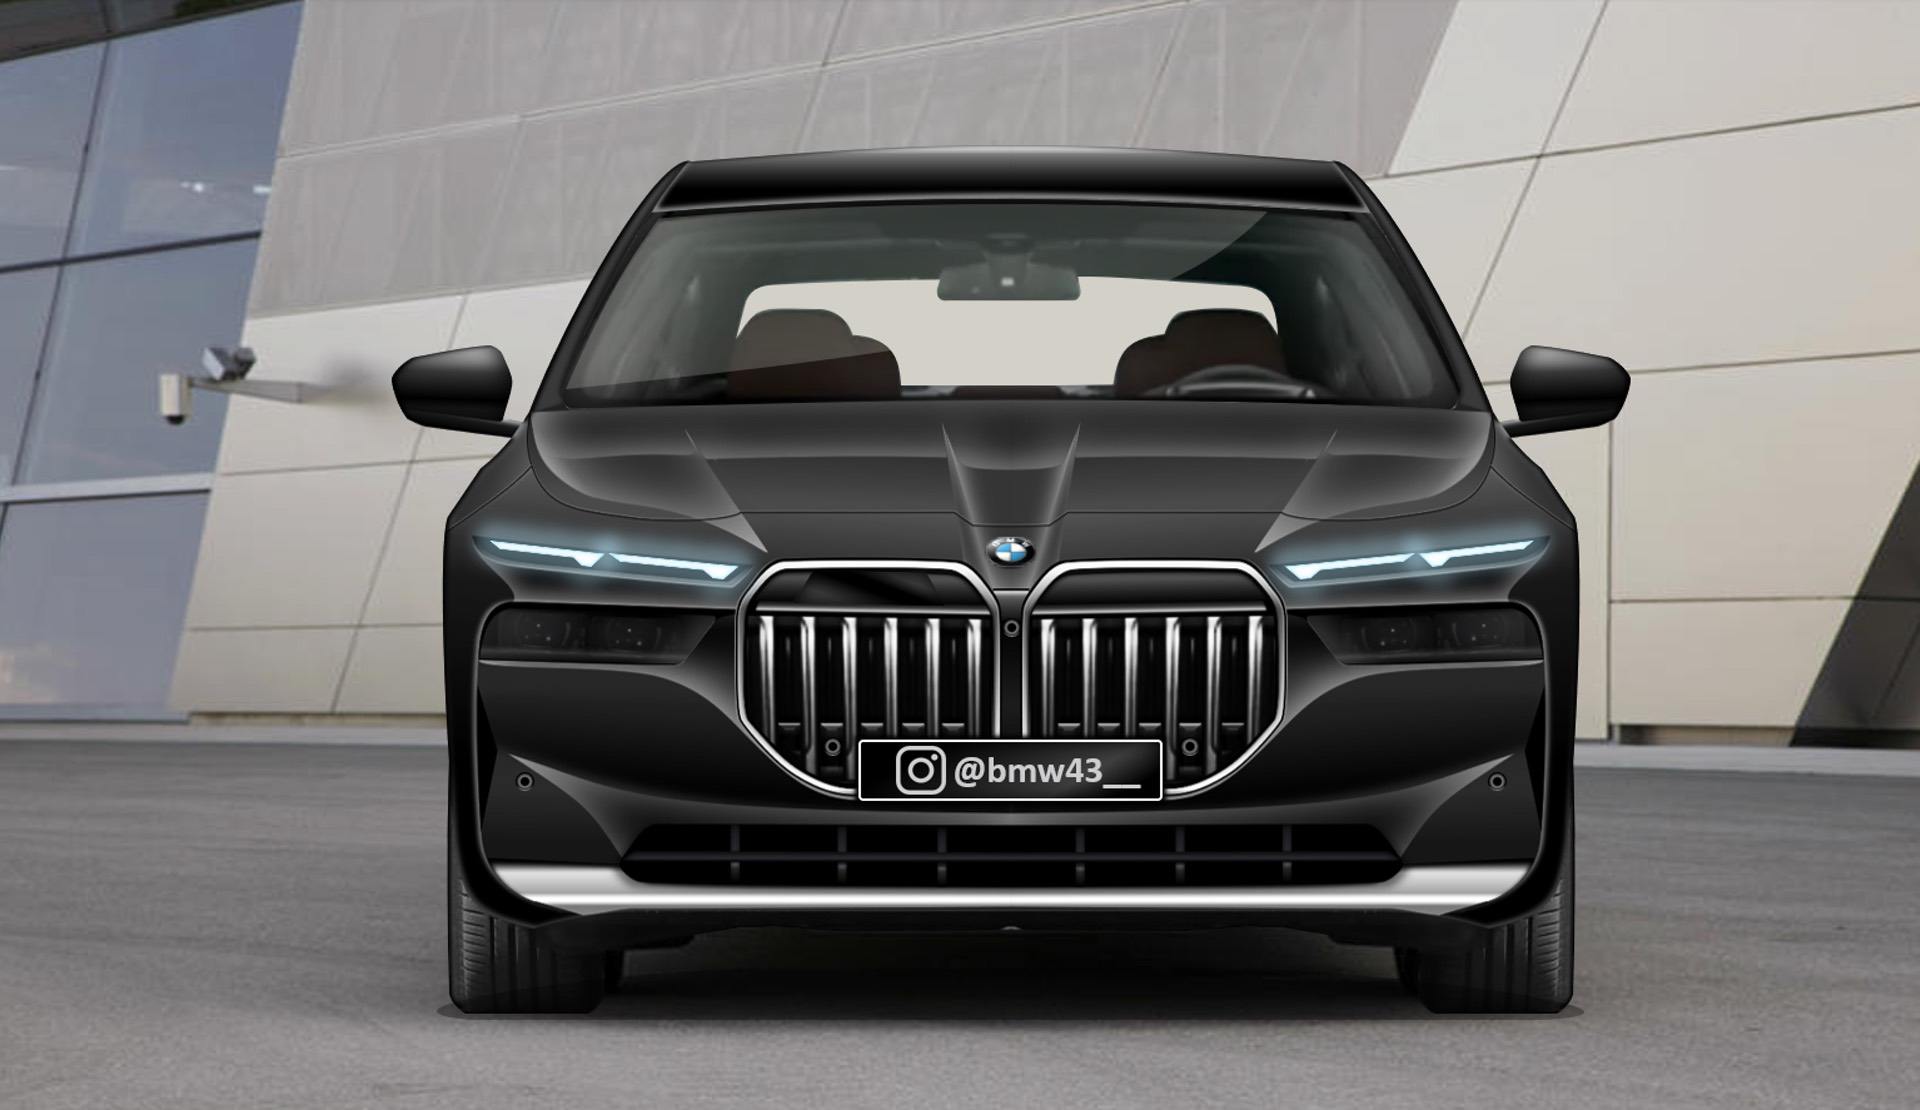 New 7 Series will the be the first BMW with Level 3 self-driving